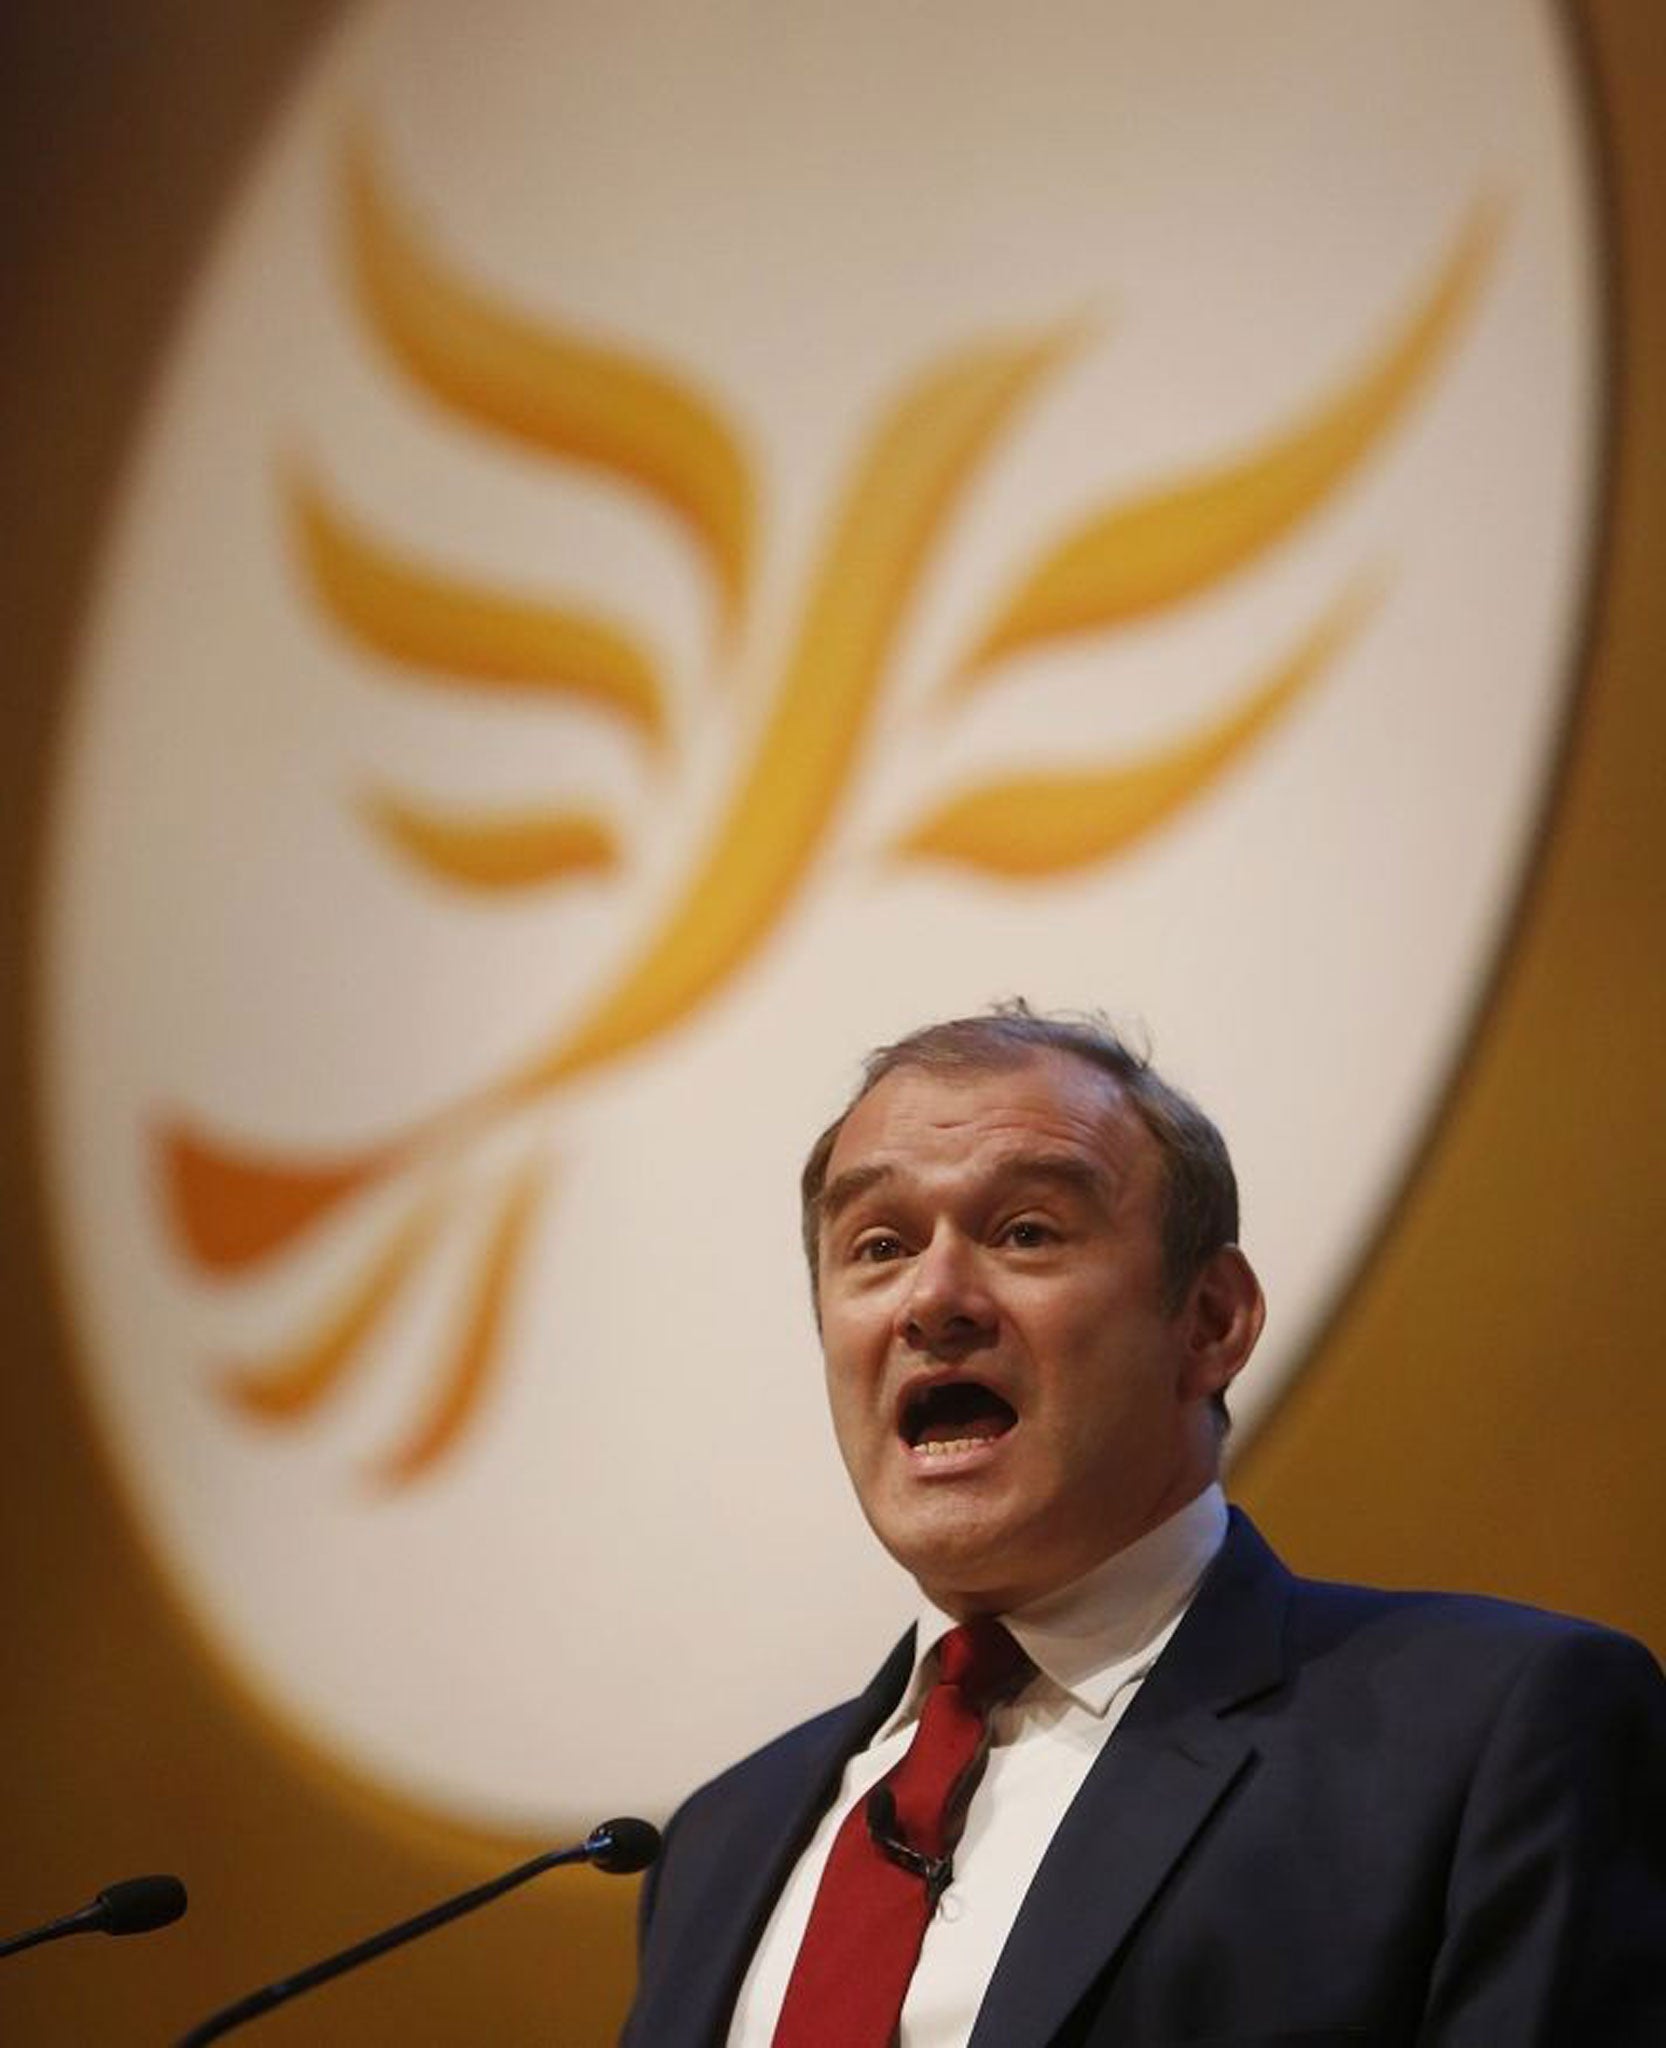 Energy Secretary Ed Davey is one of the Lib Dem's most powerful coalition Ministers